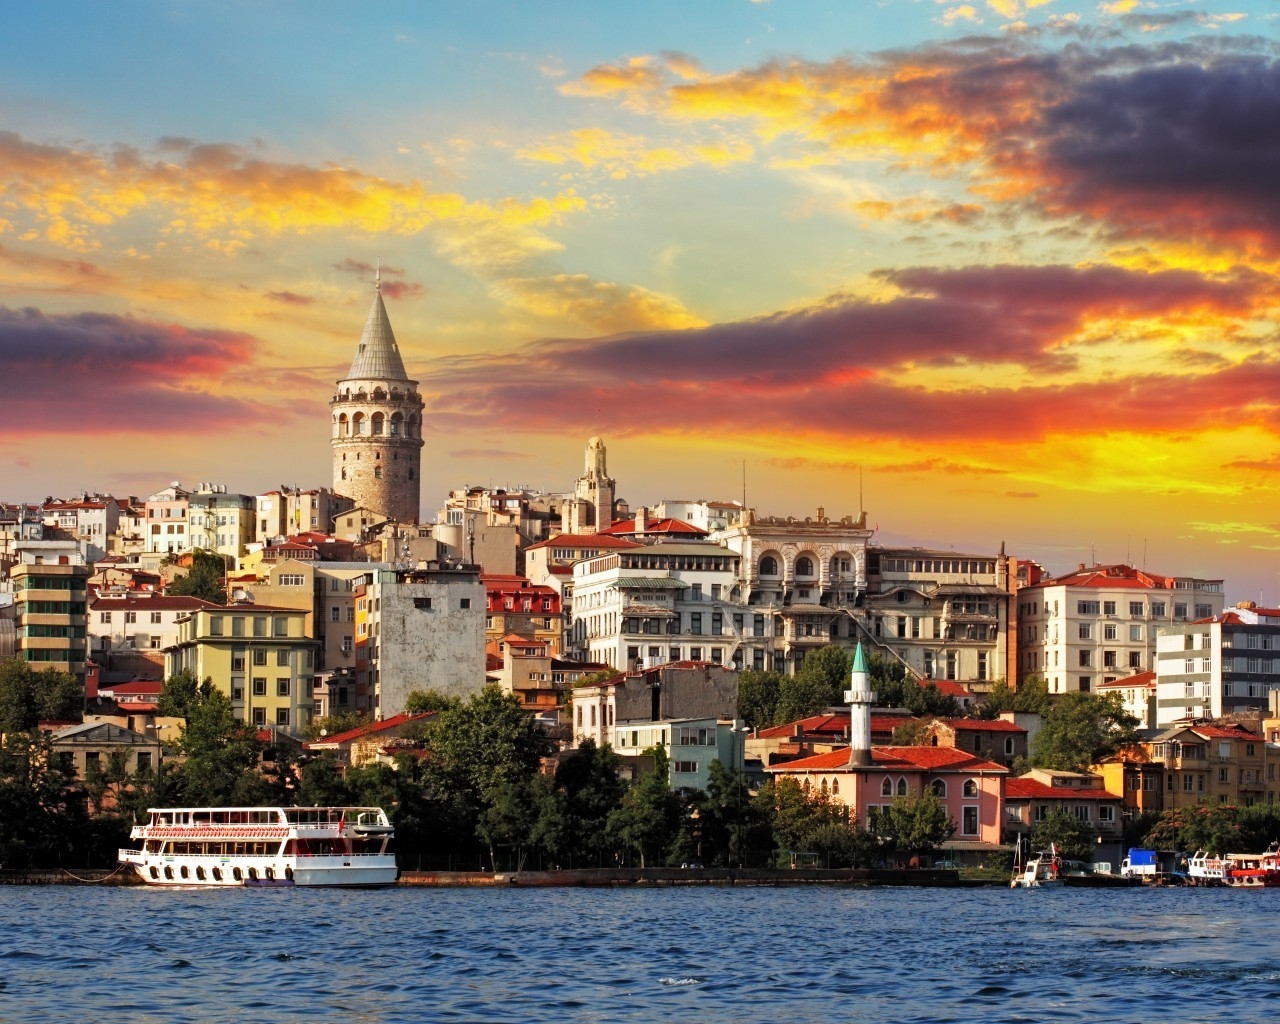 Sunset in Istambul for 1280 x 1024 resolution